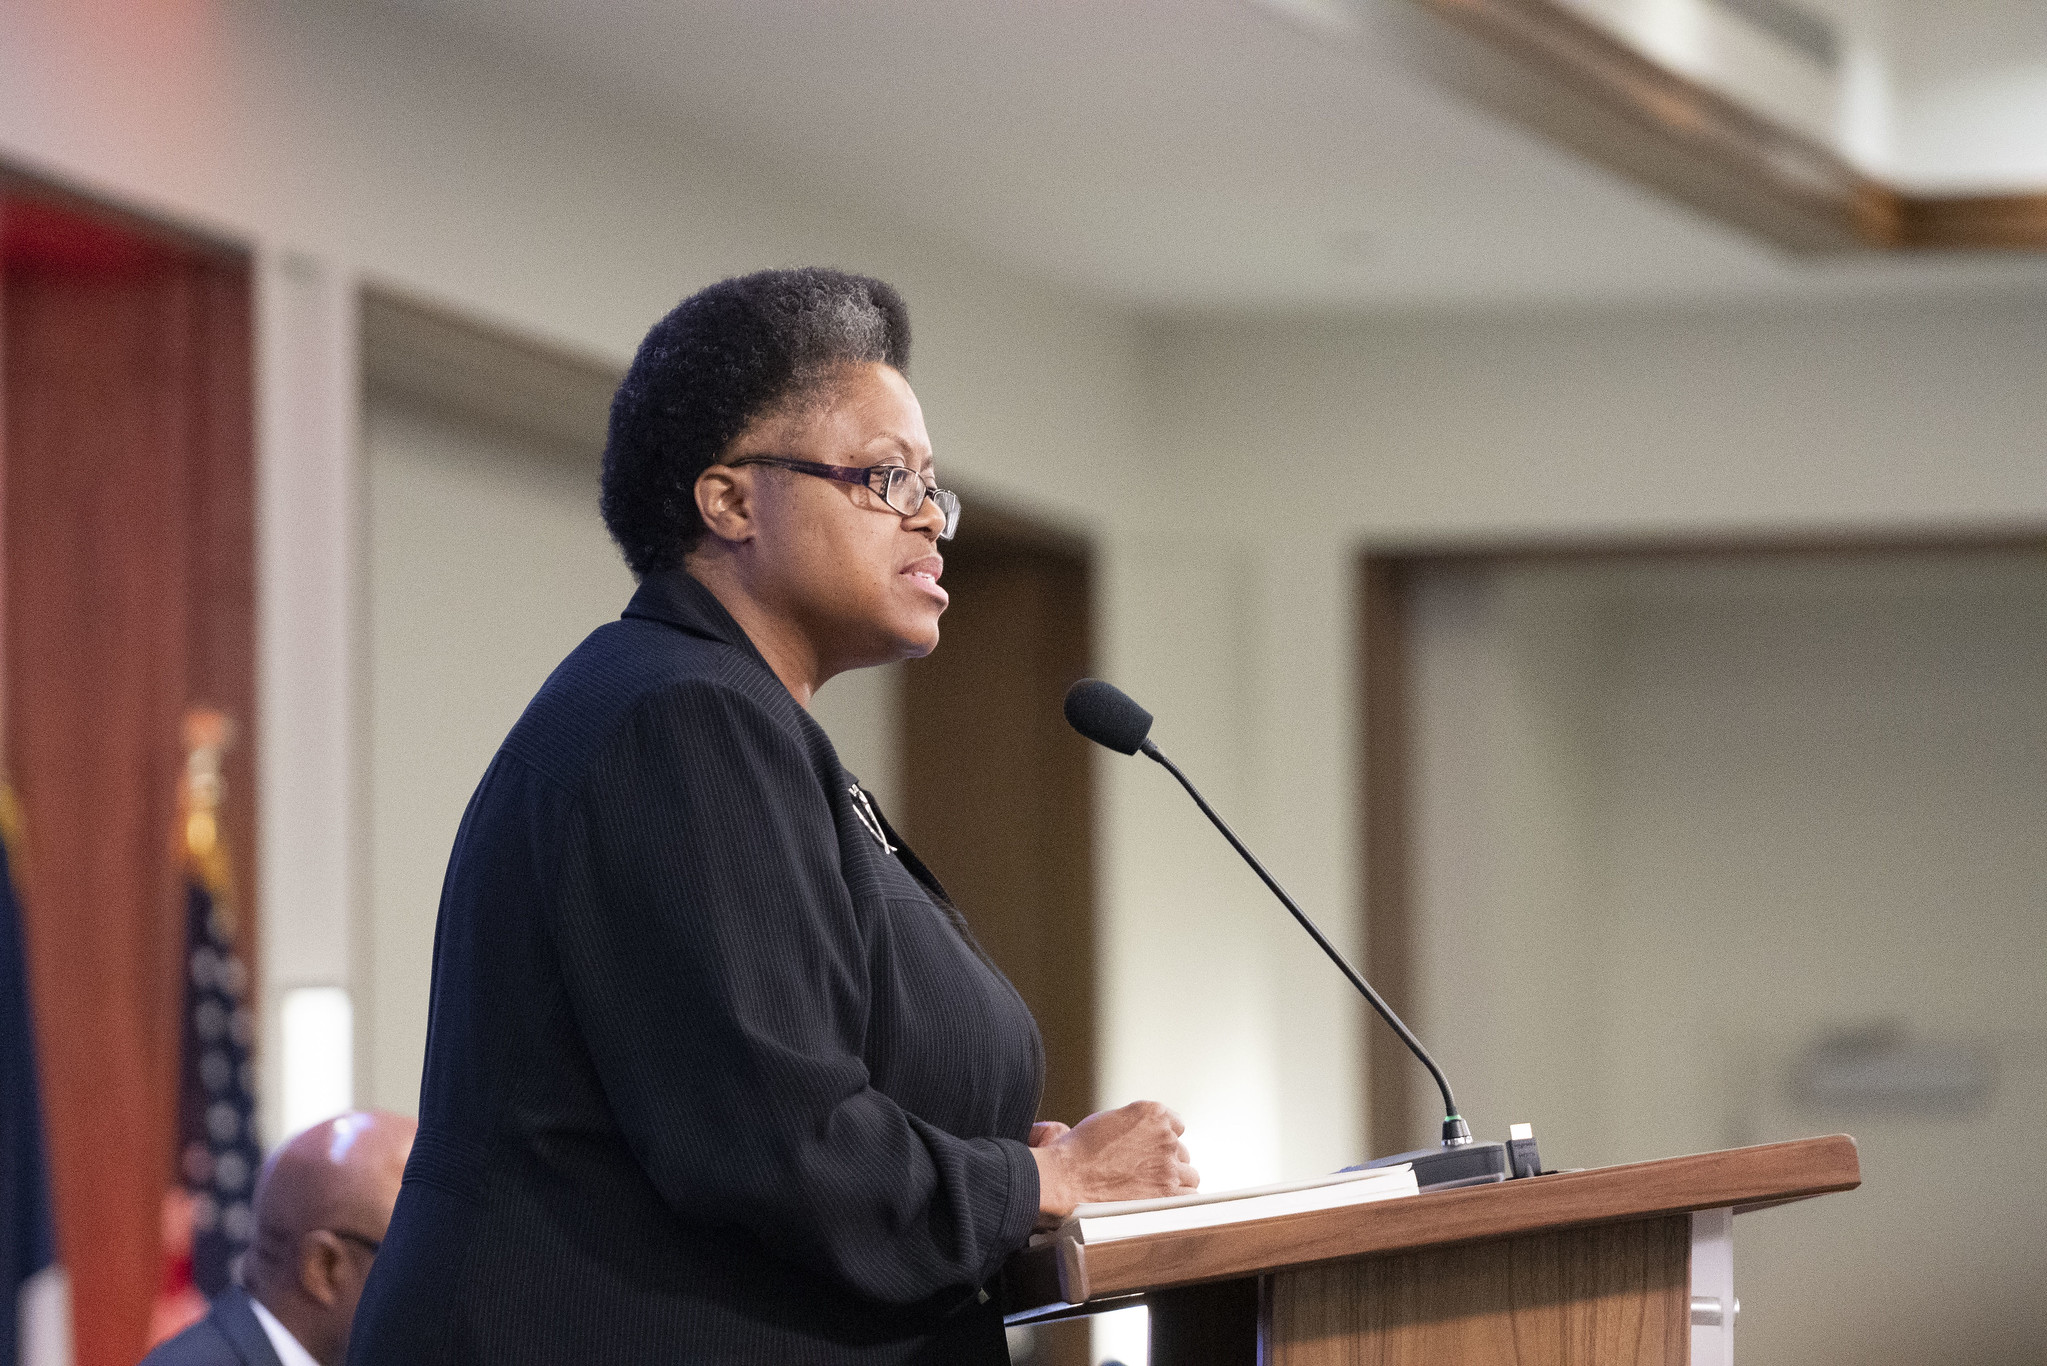 Carolyn Forrest represent a report on diversity in the NAD during the 2019 Year-End Meeting on Nov. 1. Photo by Dan Weber